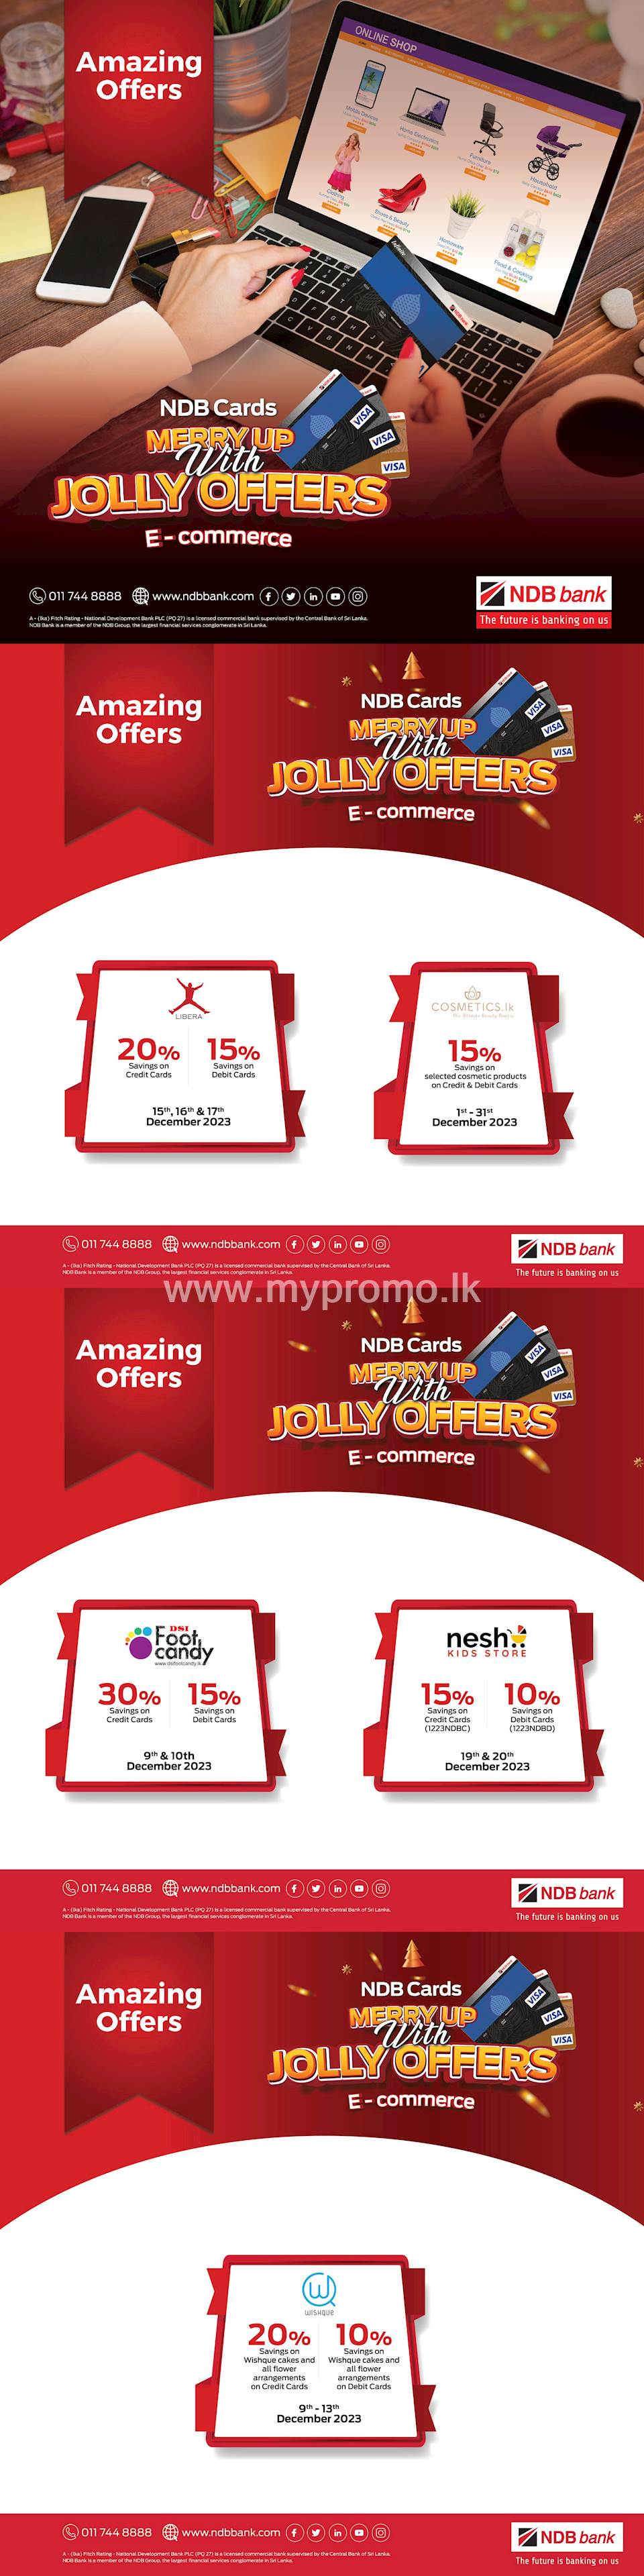 Enjoy incredible discounts on your favorite e-commerce platforms with NDB Cards